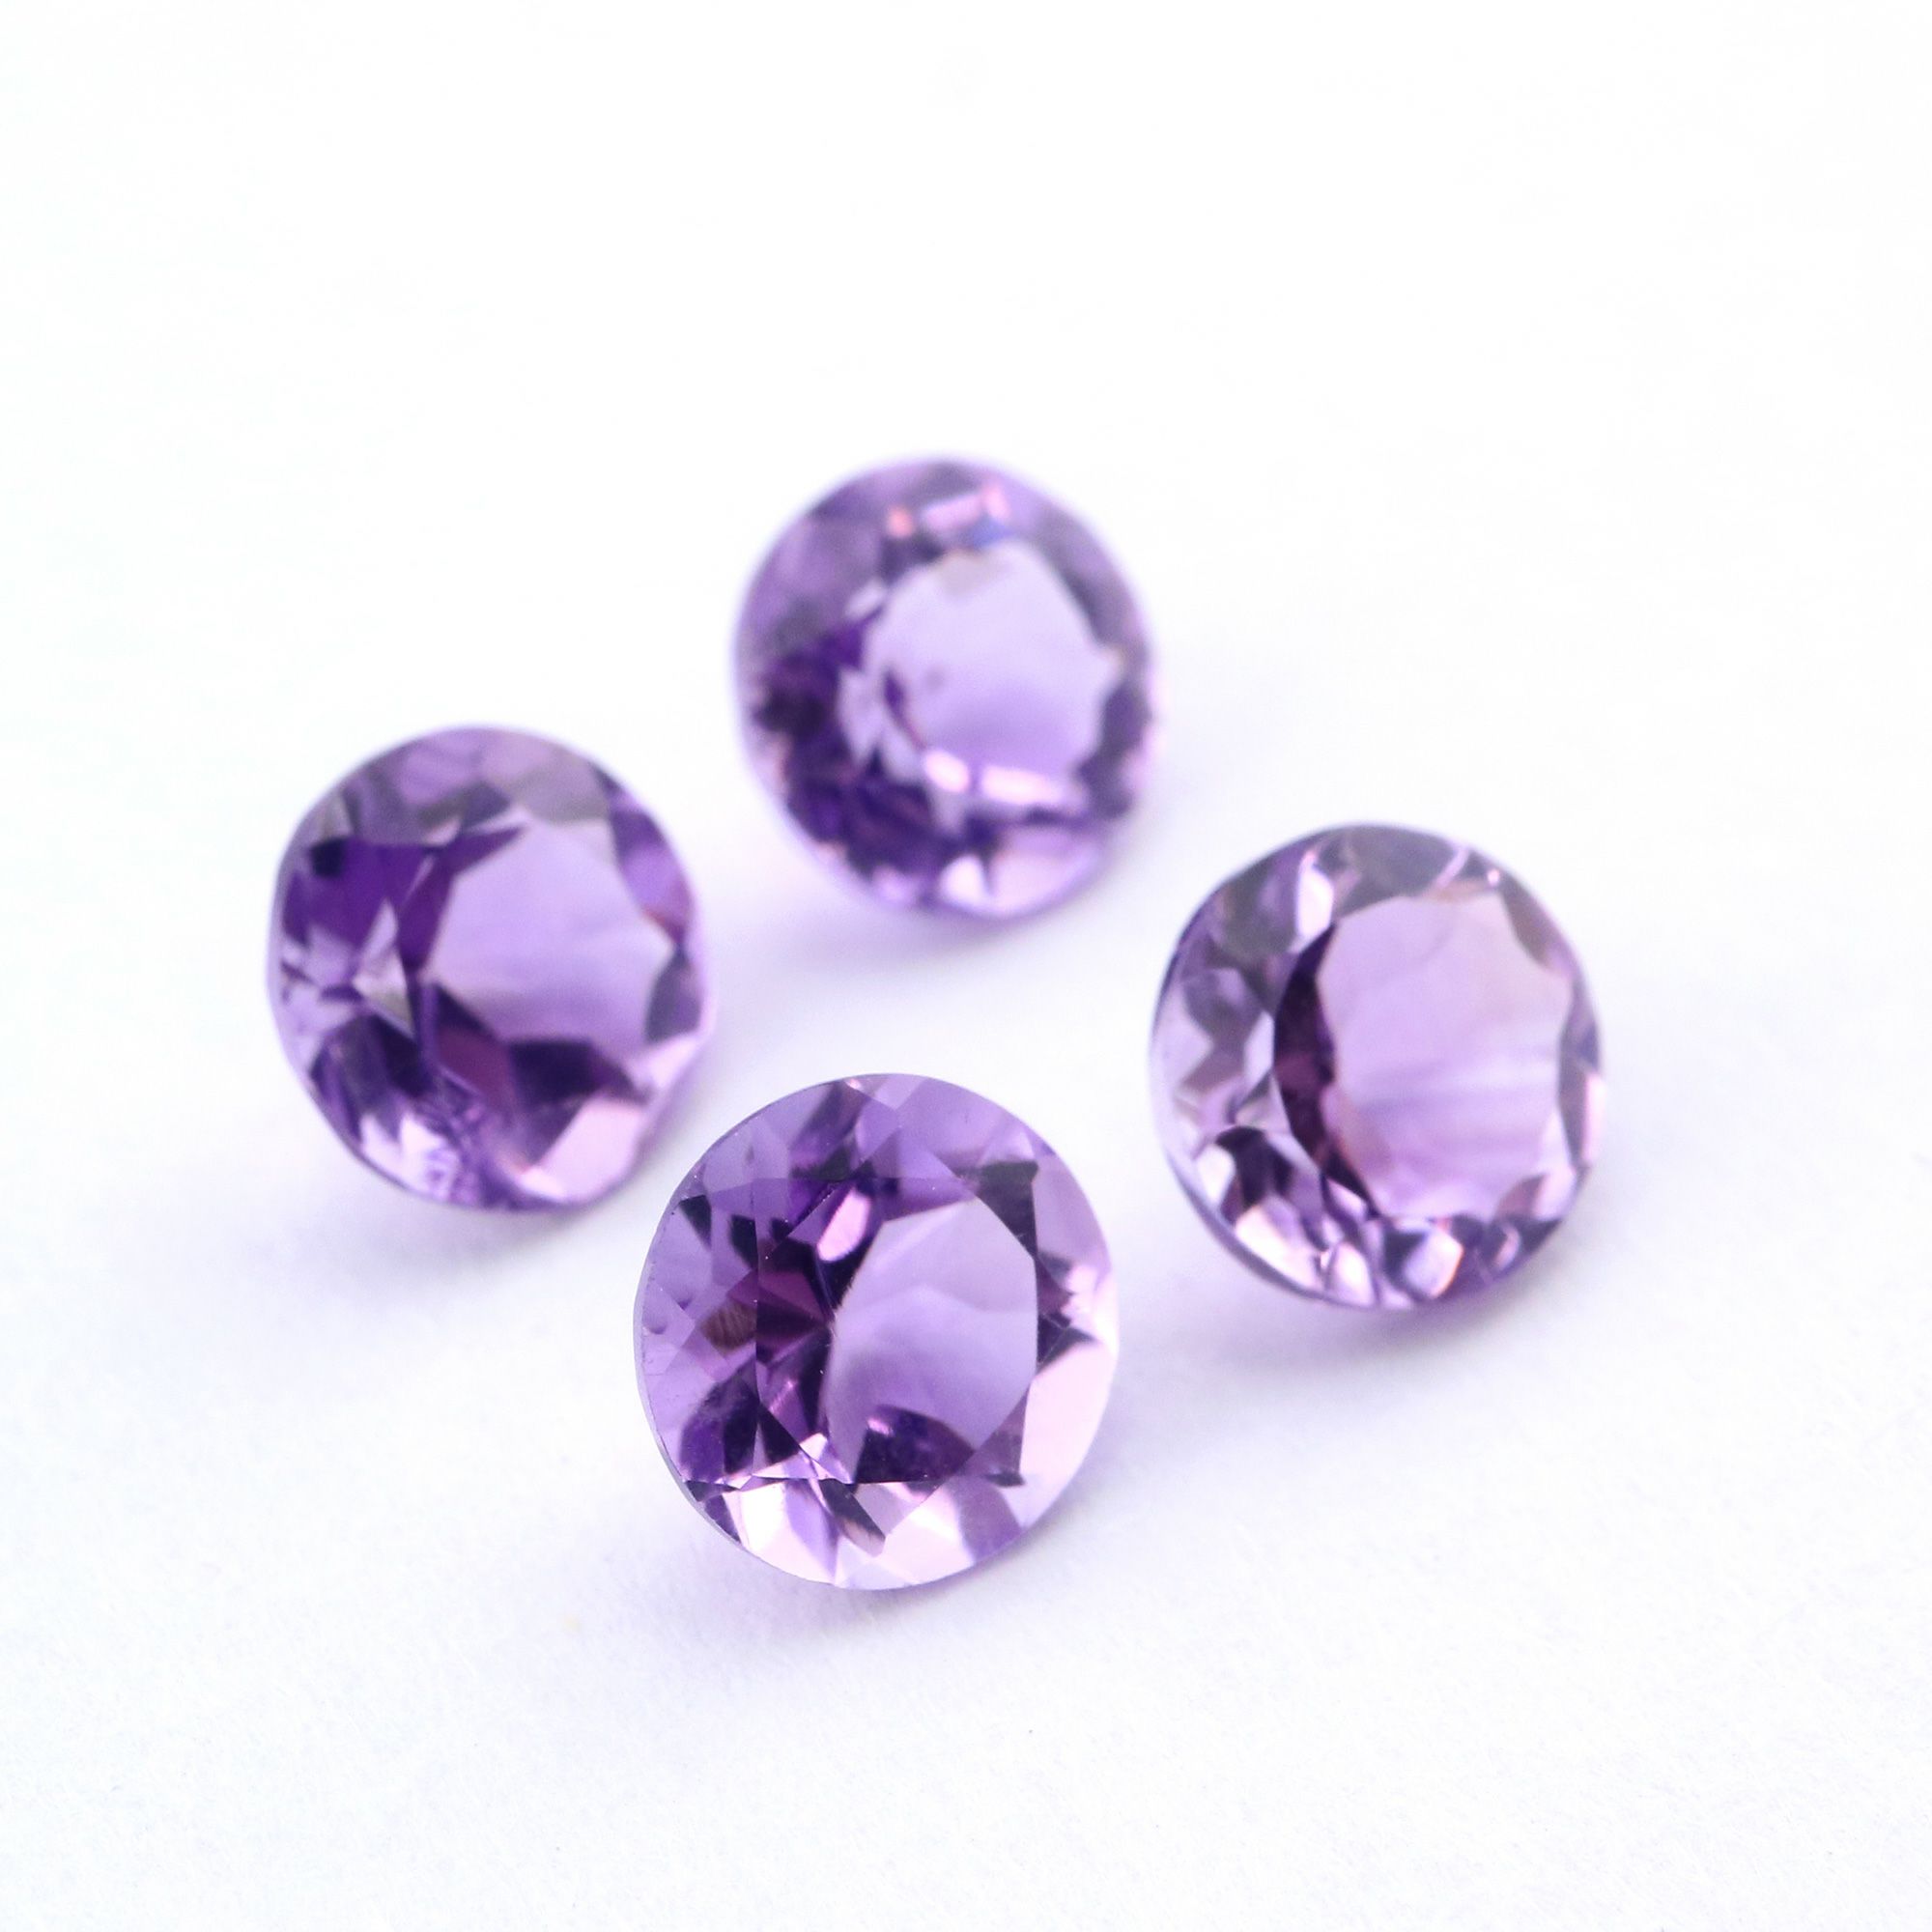 5Pcs Round Purple Amethyst February Birthstone Faceted Cut Loose Gemstone Nature Semi Precious Stone DIY Jewelry Supplies 4110169 - Click Image to Close